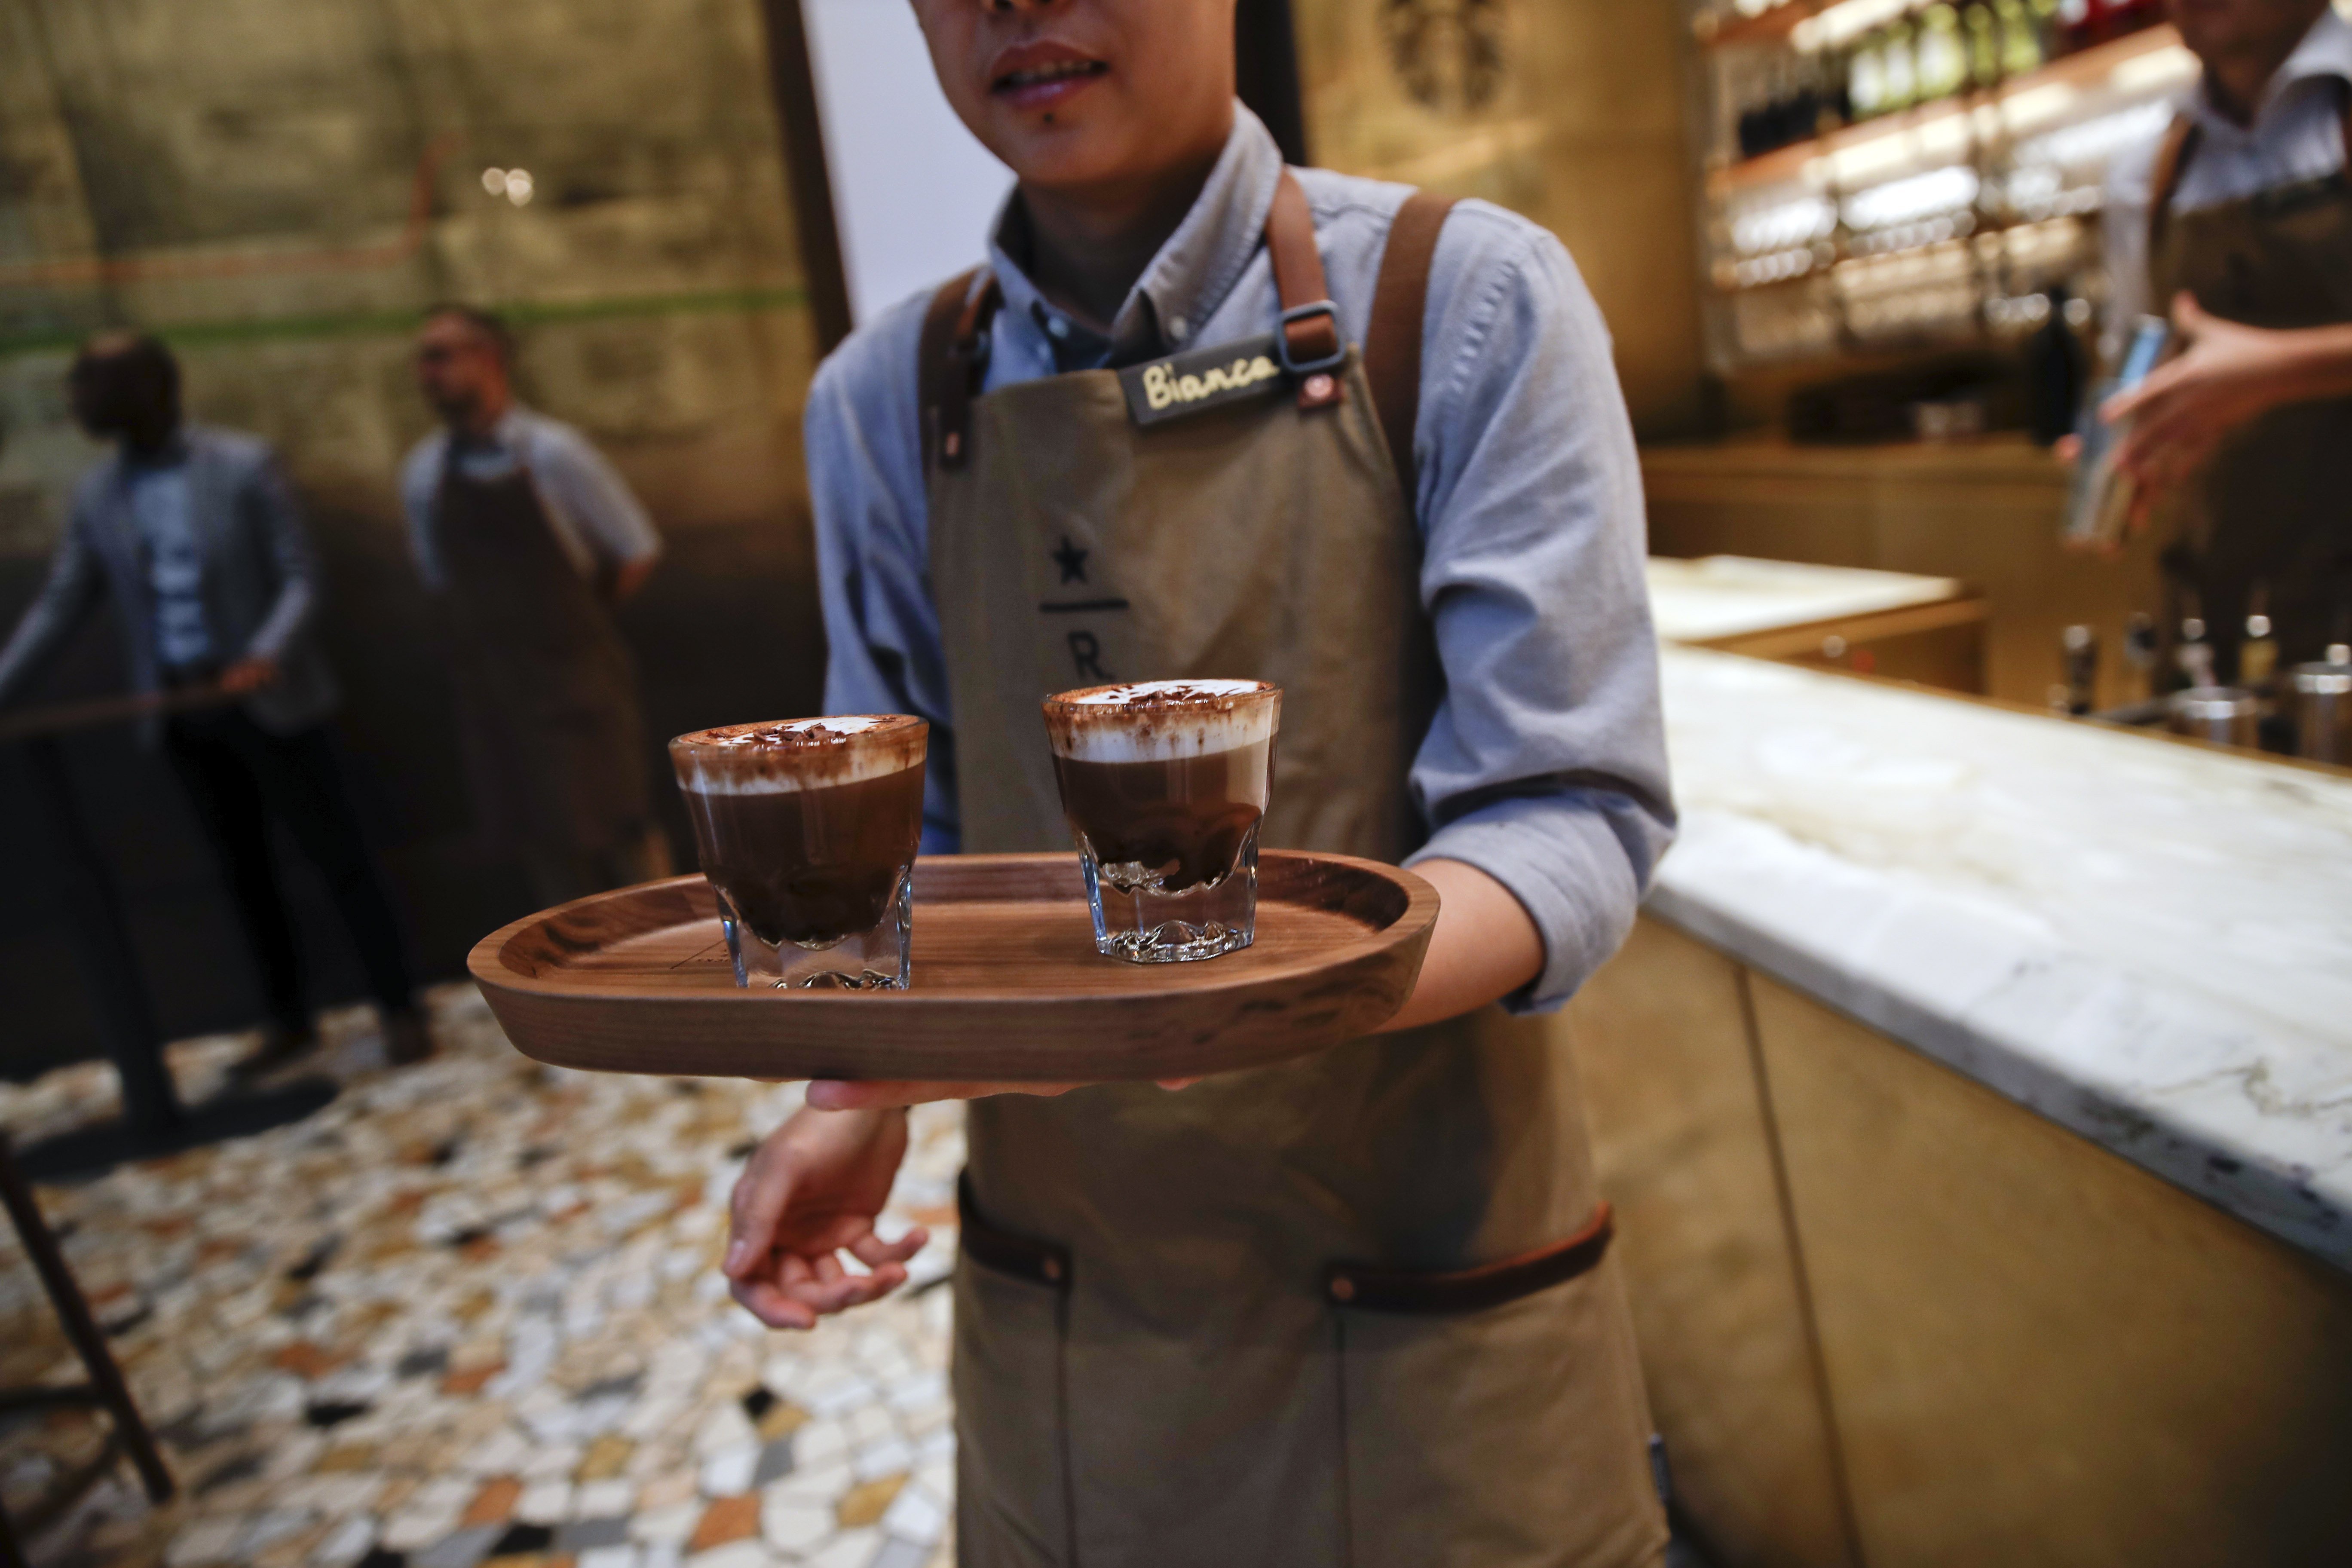 In this photo taken on Tuesday, Sept. 4, 2108, a waiter serves cappuccini at the Starbucks store in Milan, Italy. Starbucks opens its first store in Italy Friday, betting that premium brews and novelties like a heated marble-topped coffee bar will win patrons in a country fond of its espresso rituals. Decades ago, Milan’s coffee bars had inspired the chain’s vision. Starbucks hopes clients will linger at Starbucks Reserve Roastery, where they can watch beans being roasted, sip Reserve coffee or have cocktails at a mezzanine-level bar in a cavernous space that once was a post office near the city’s Duomo, or cathedral. (AP Photo/Luca Bruno)